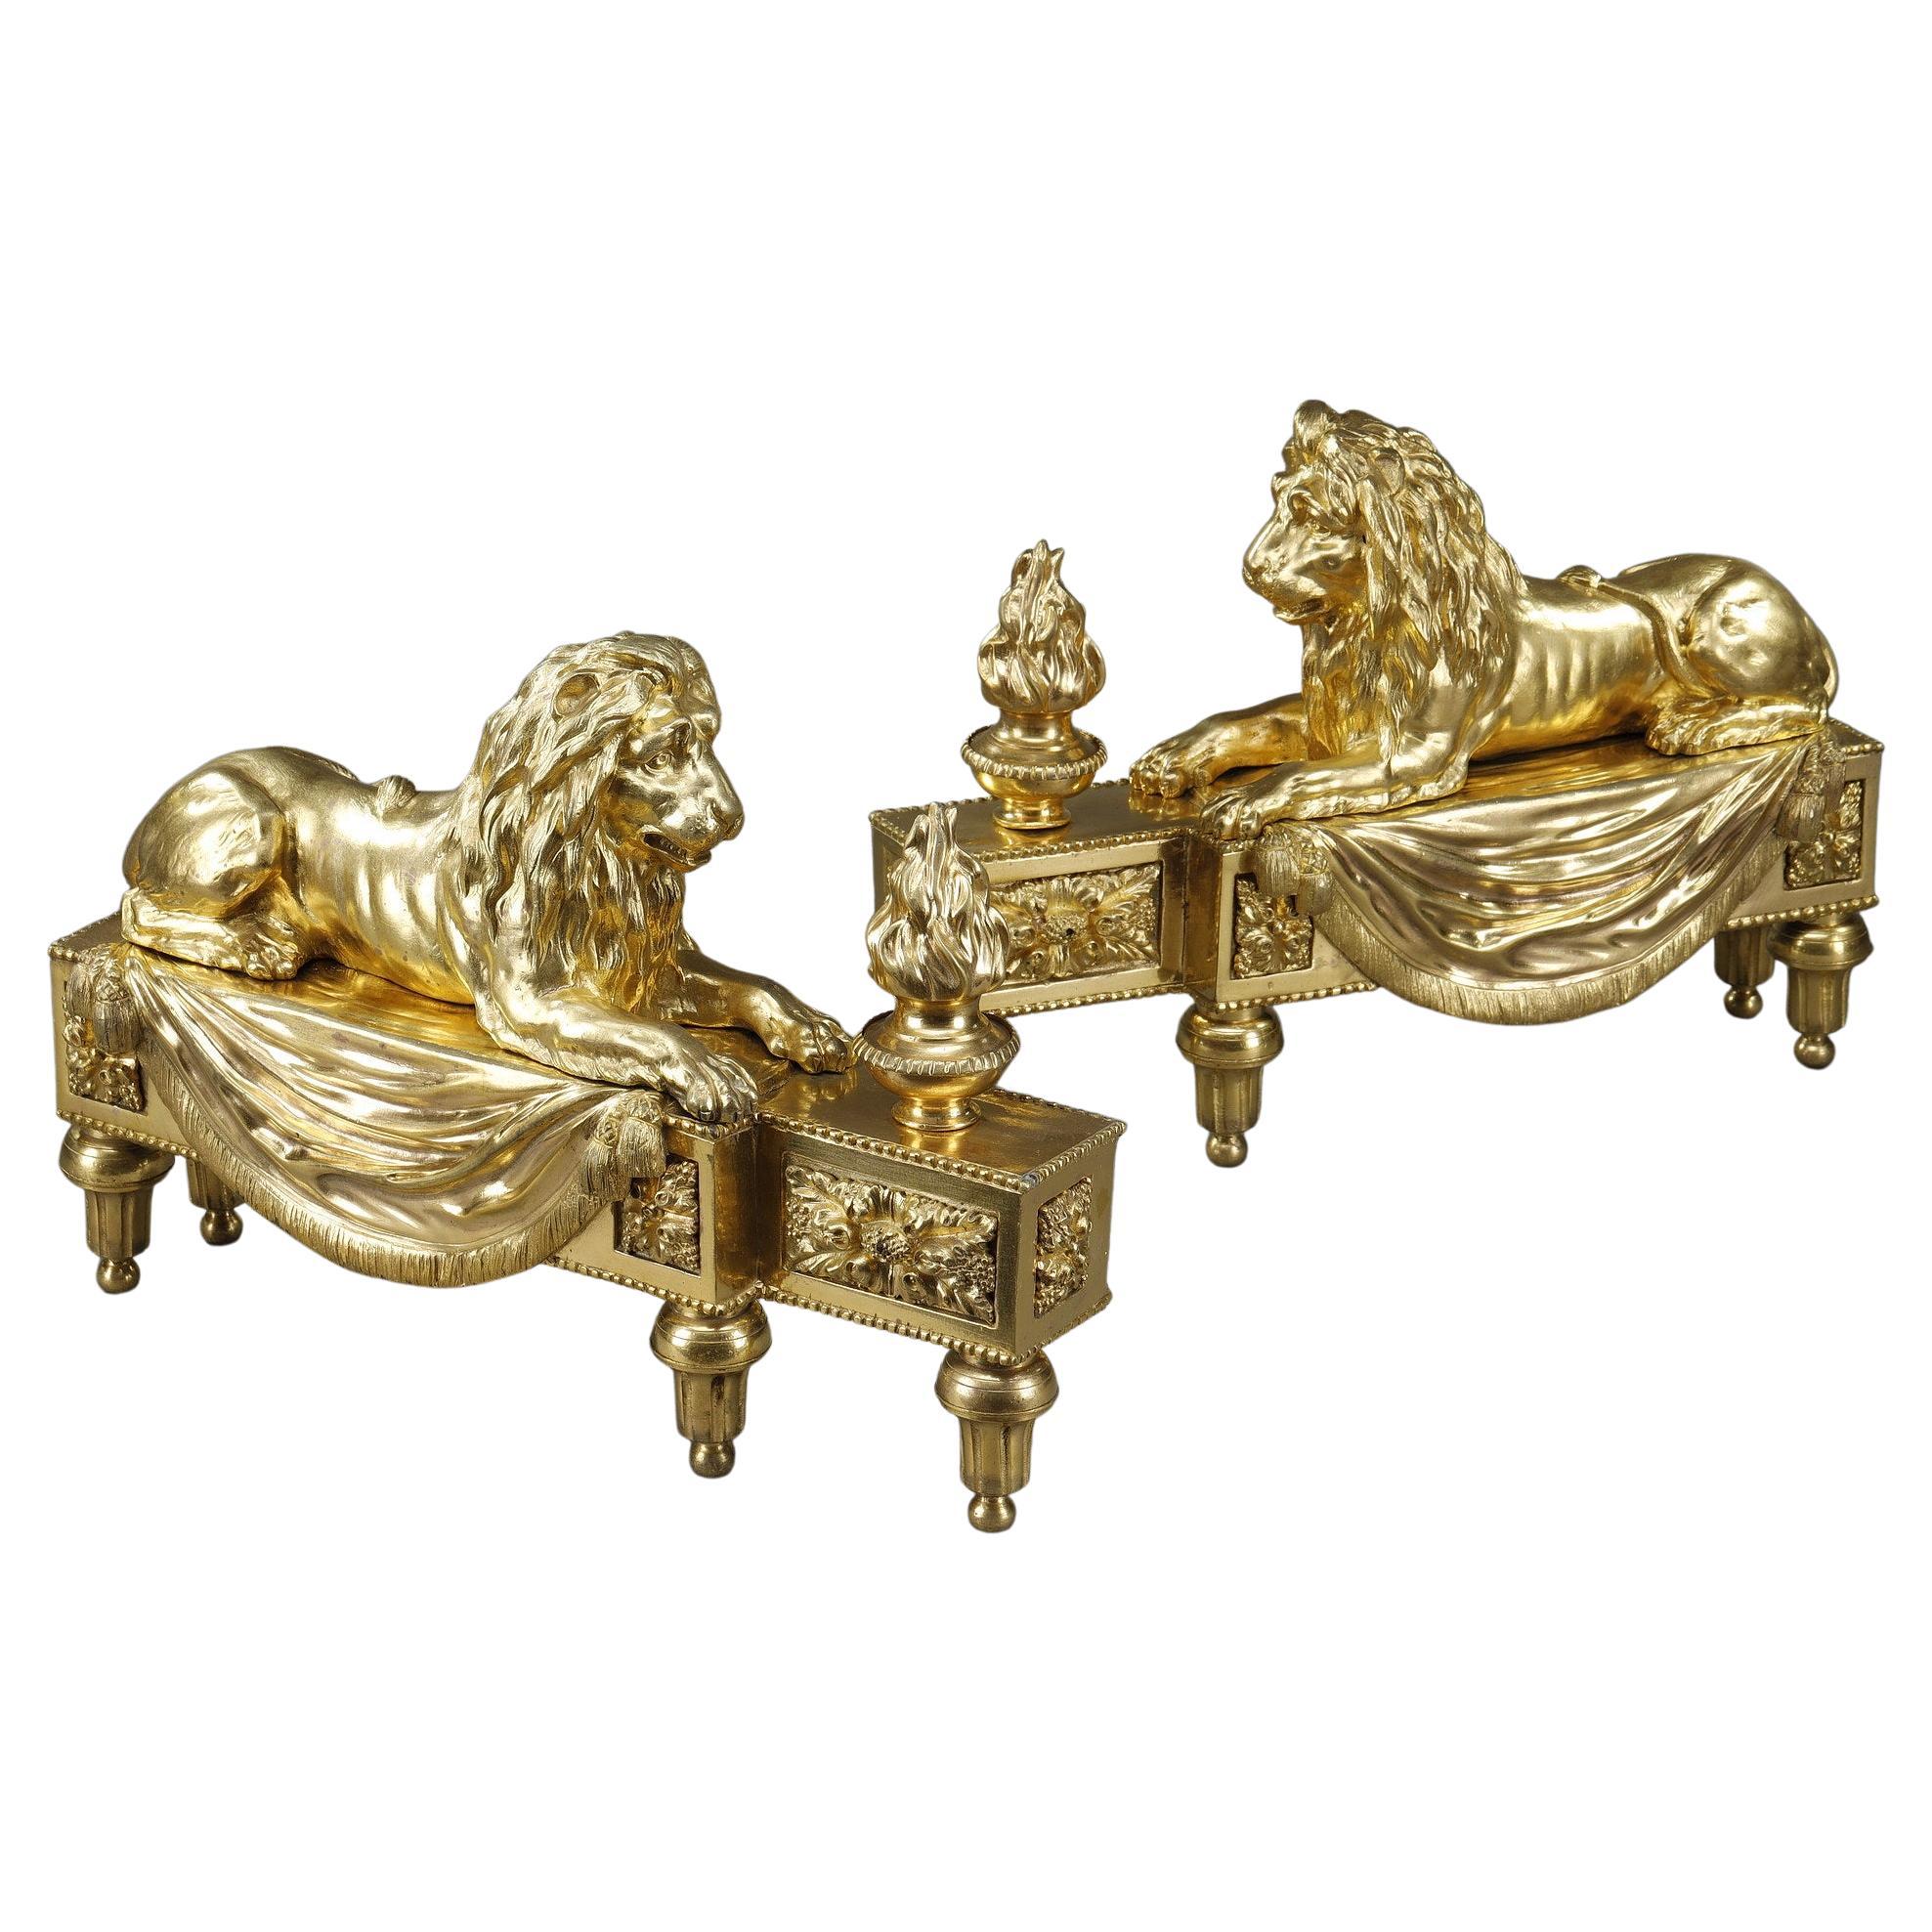 Pair of Andirons with Lions in Gilded and Chiseled Bronze